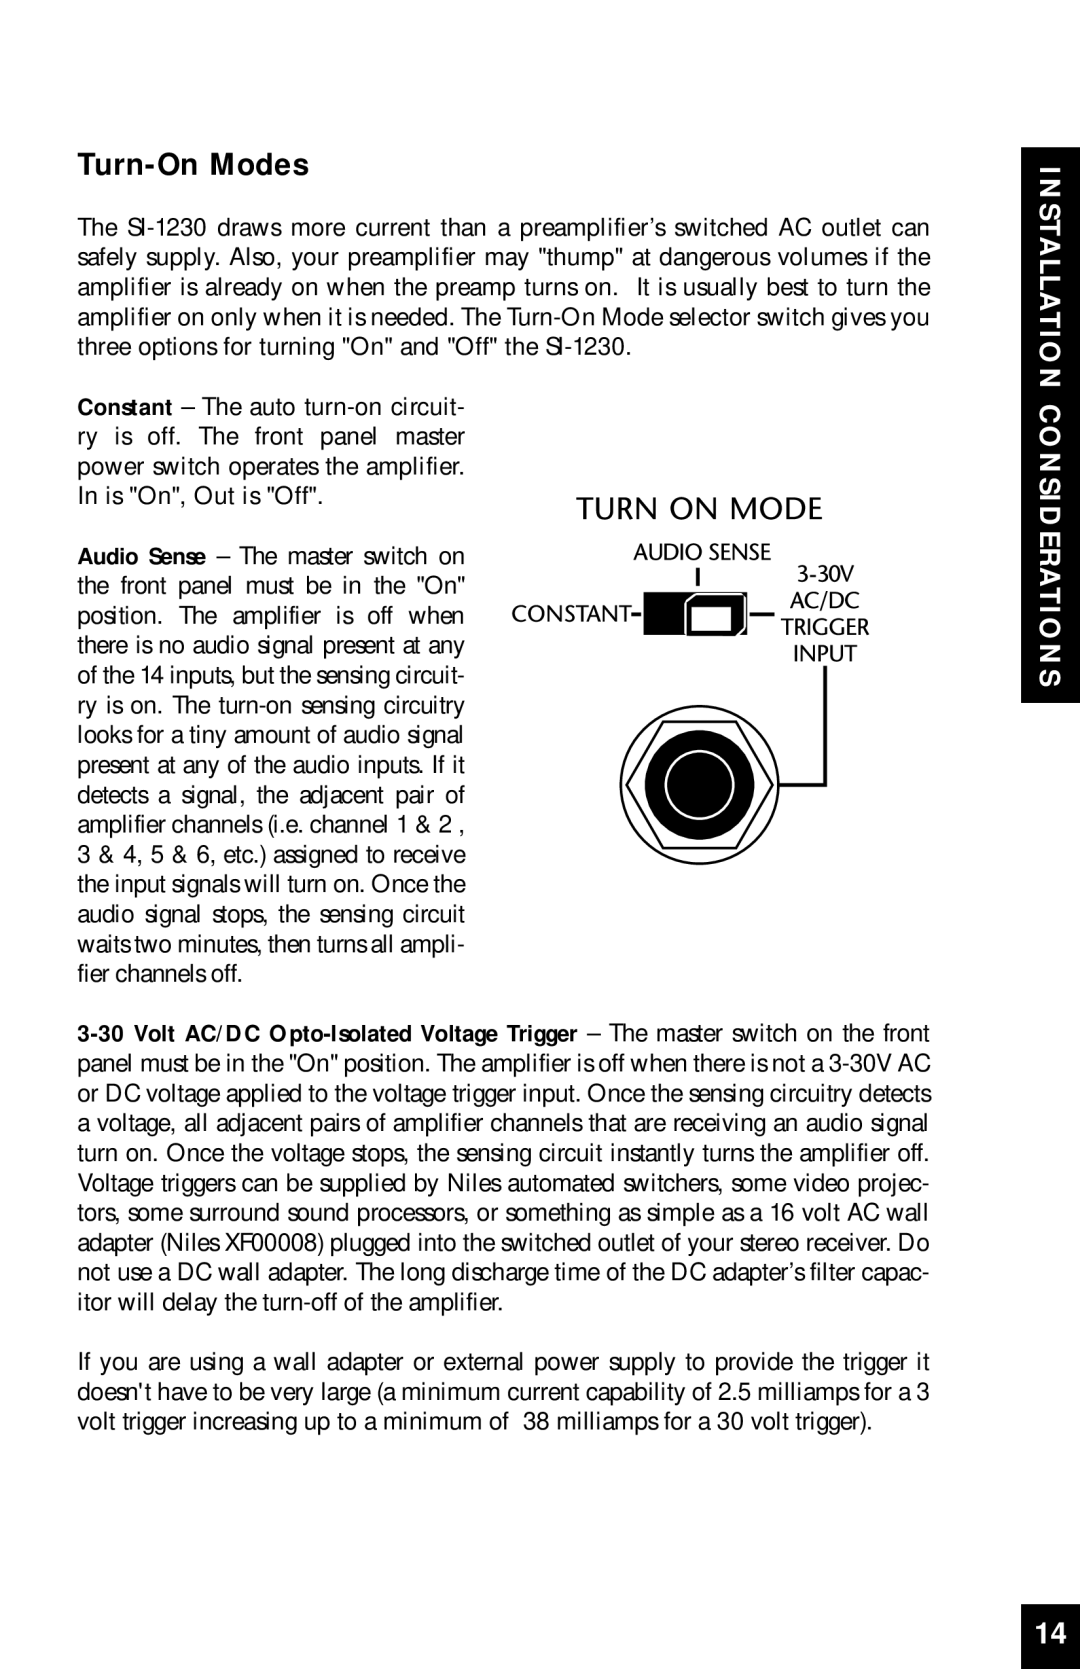 Niles Audio SI-1230 manual Turn-OnModes, Installation Considerations 